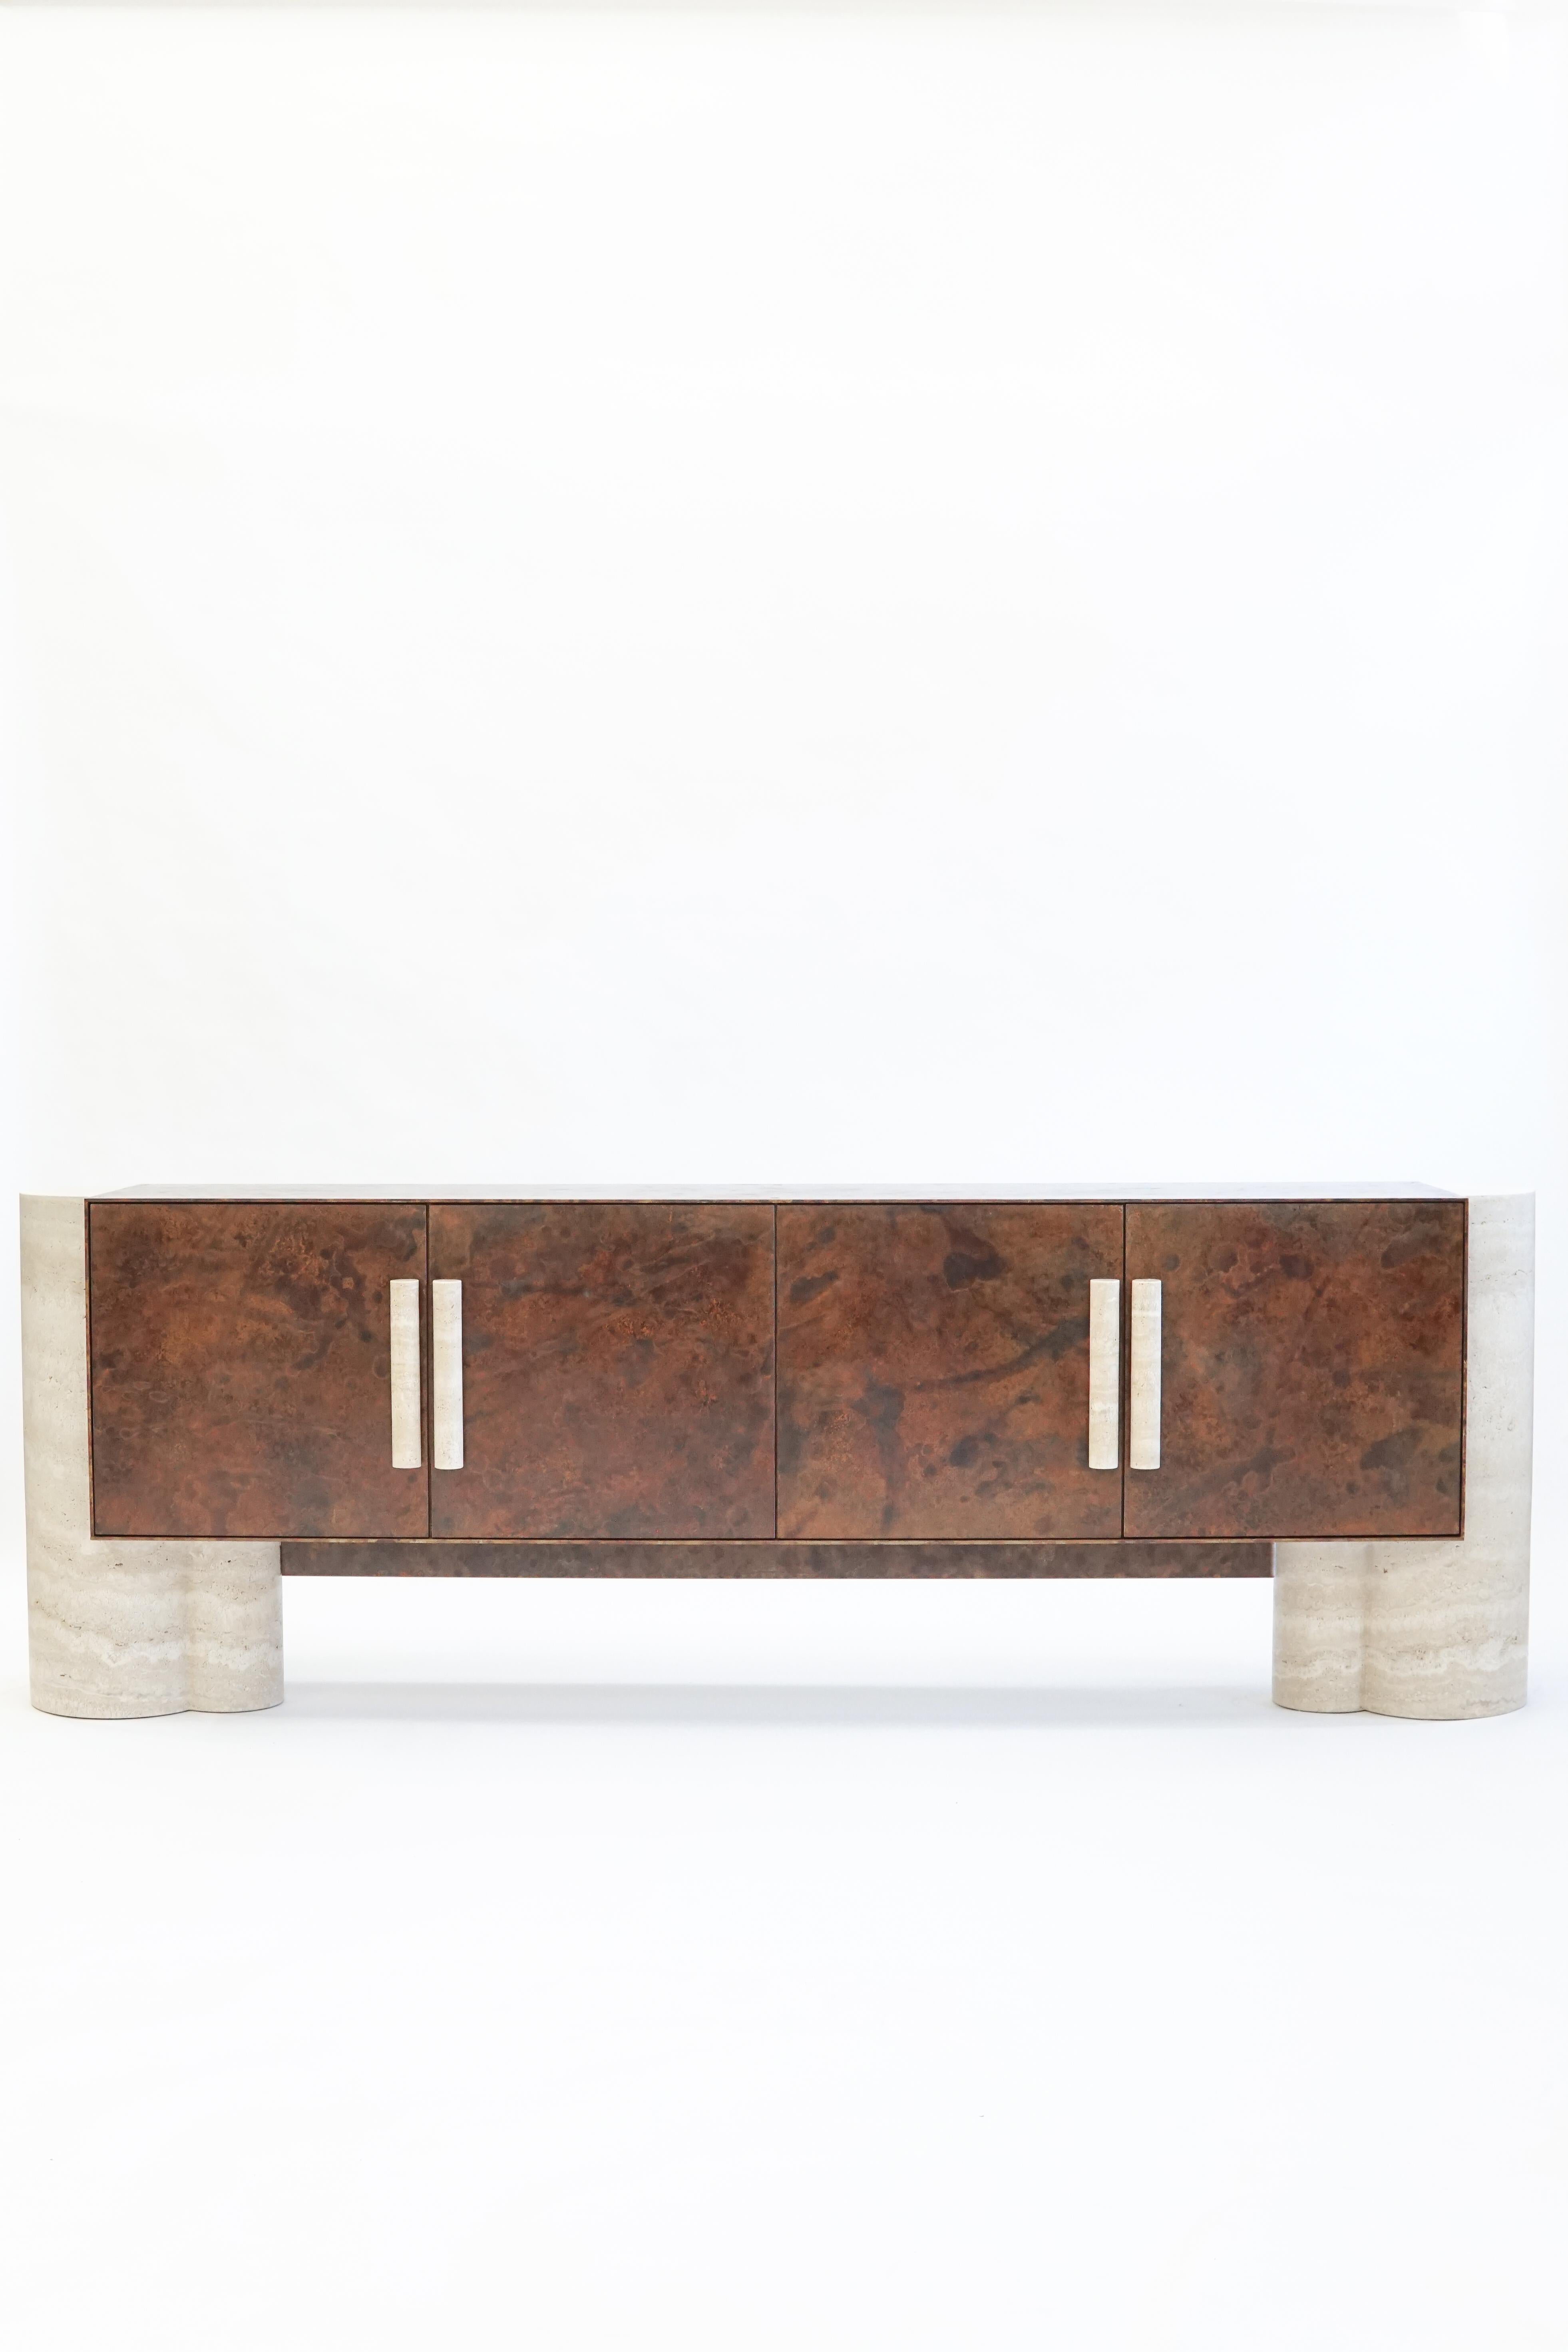 Onna credenza by Swell Studio
Dimensions: W209 x D36 x H72 cm
Material: Shown in alabastrino travertine, SS house patina’d steel exterior, walnut interior (Available in variety of finish options.) 


The Onna credenza is a nod to the elevated